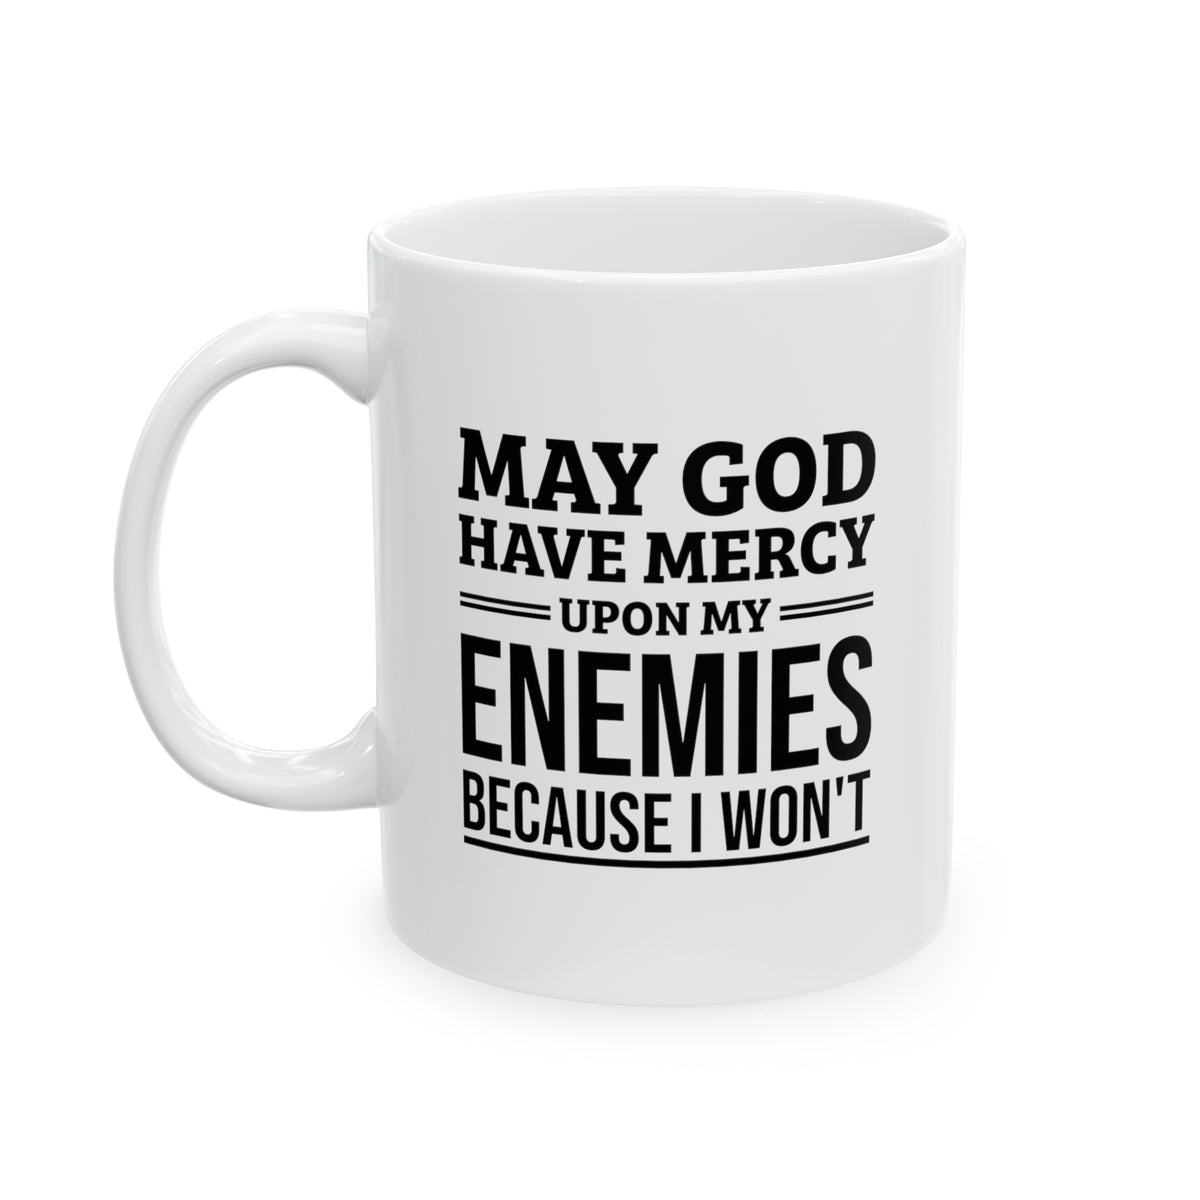 May God Have Mercy Upon My Enemies Because I Won’t - Coffee Mug For Army Veteran